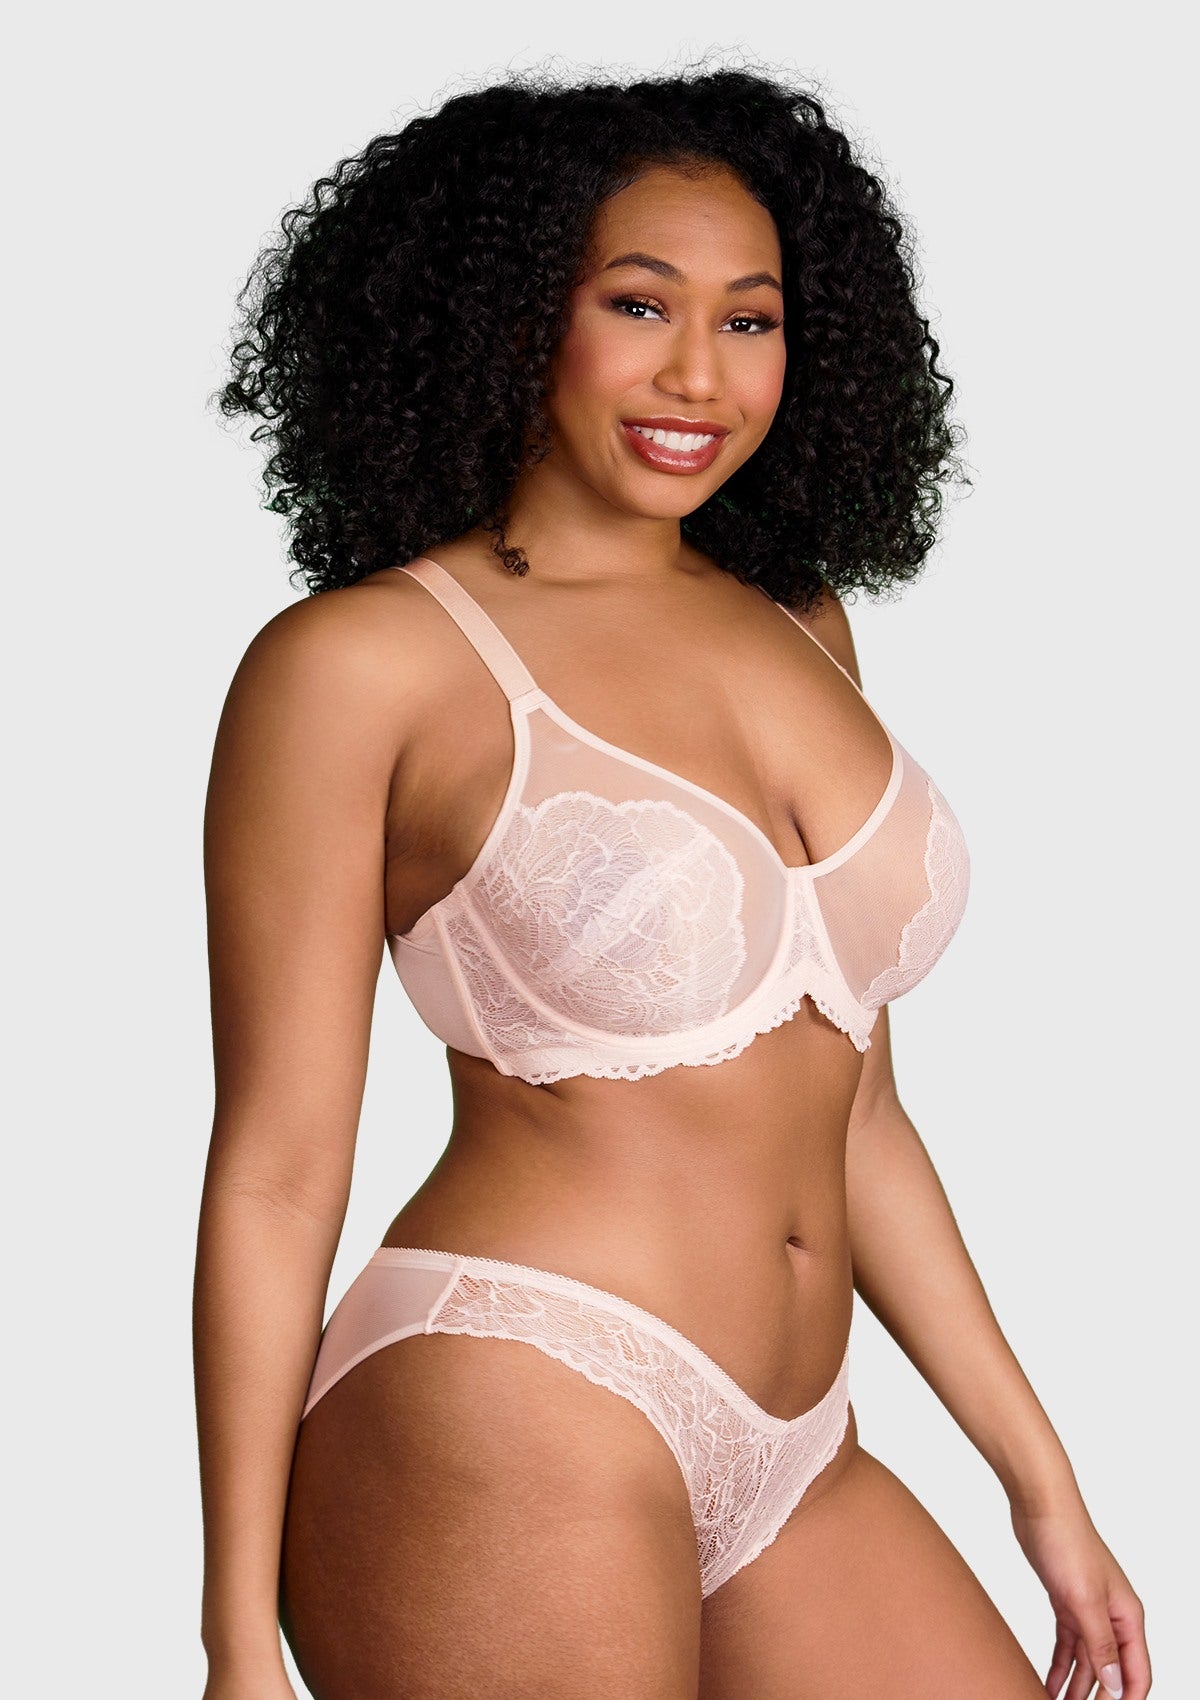 HSIA Blossom Sheer Lace Bra: Comfortable Underwire Bra For Big Busts - White / 44 / G